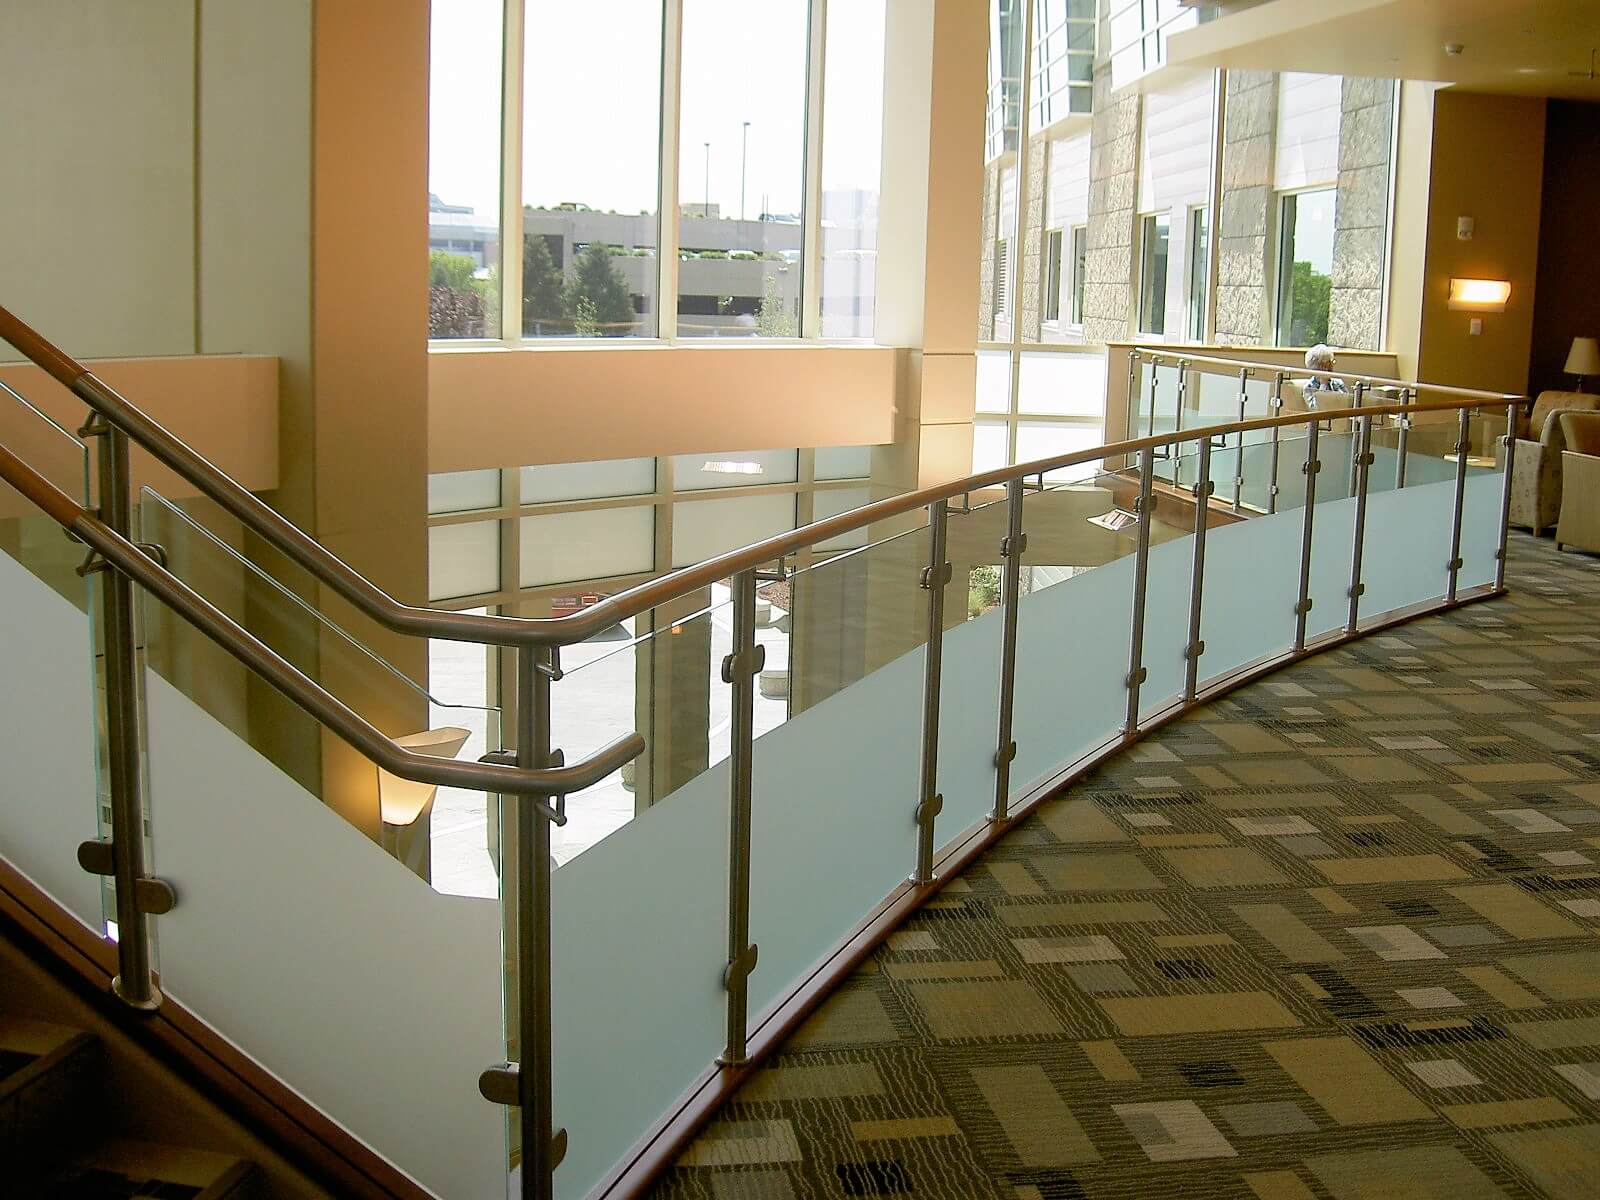 Circum guardrail installation with partially etched glass infill at Mercy Medical Center, OH.